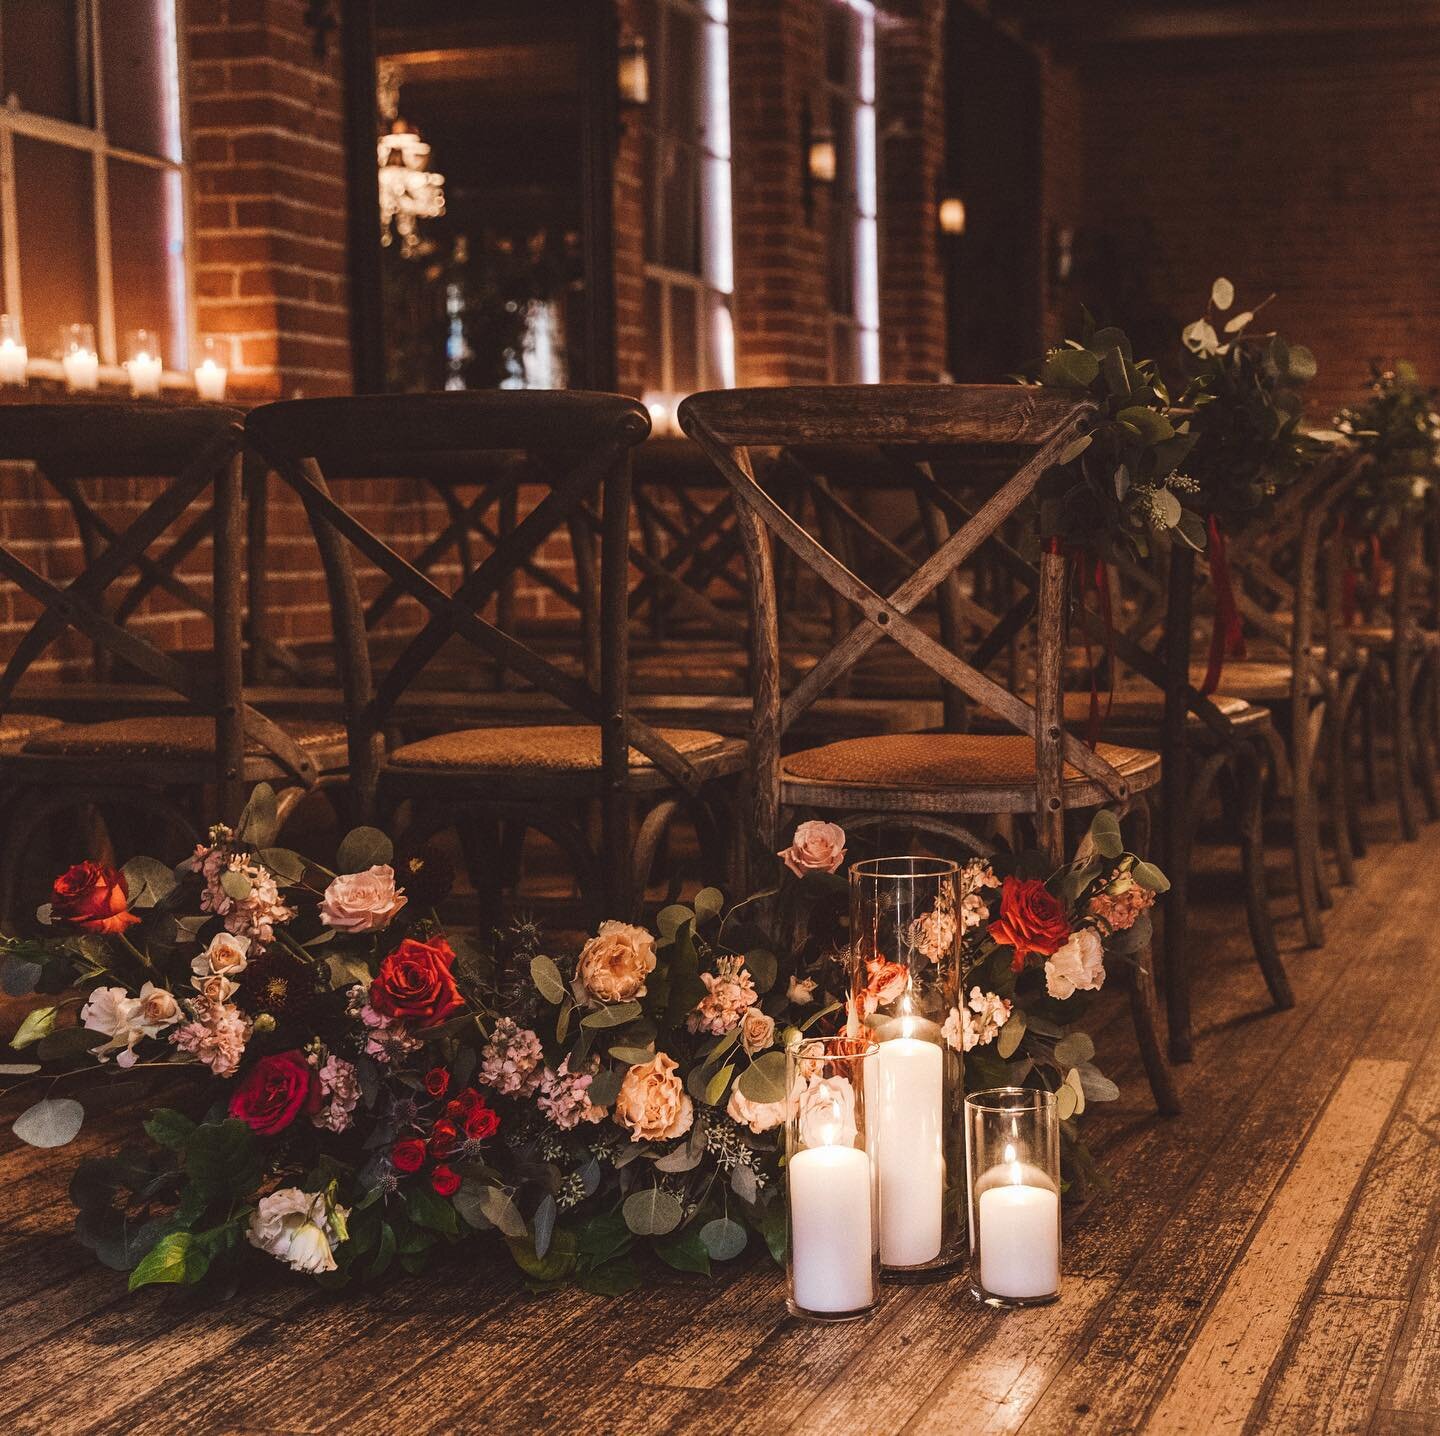 Throwing it back to this romantic ceremony decor we did at @carondelethouse The brick walls and wood floors paired with the soft candlelight and lush florals, ugh so in LOVE! 💛